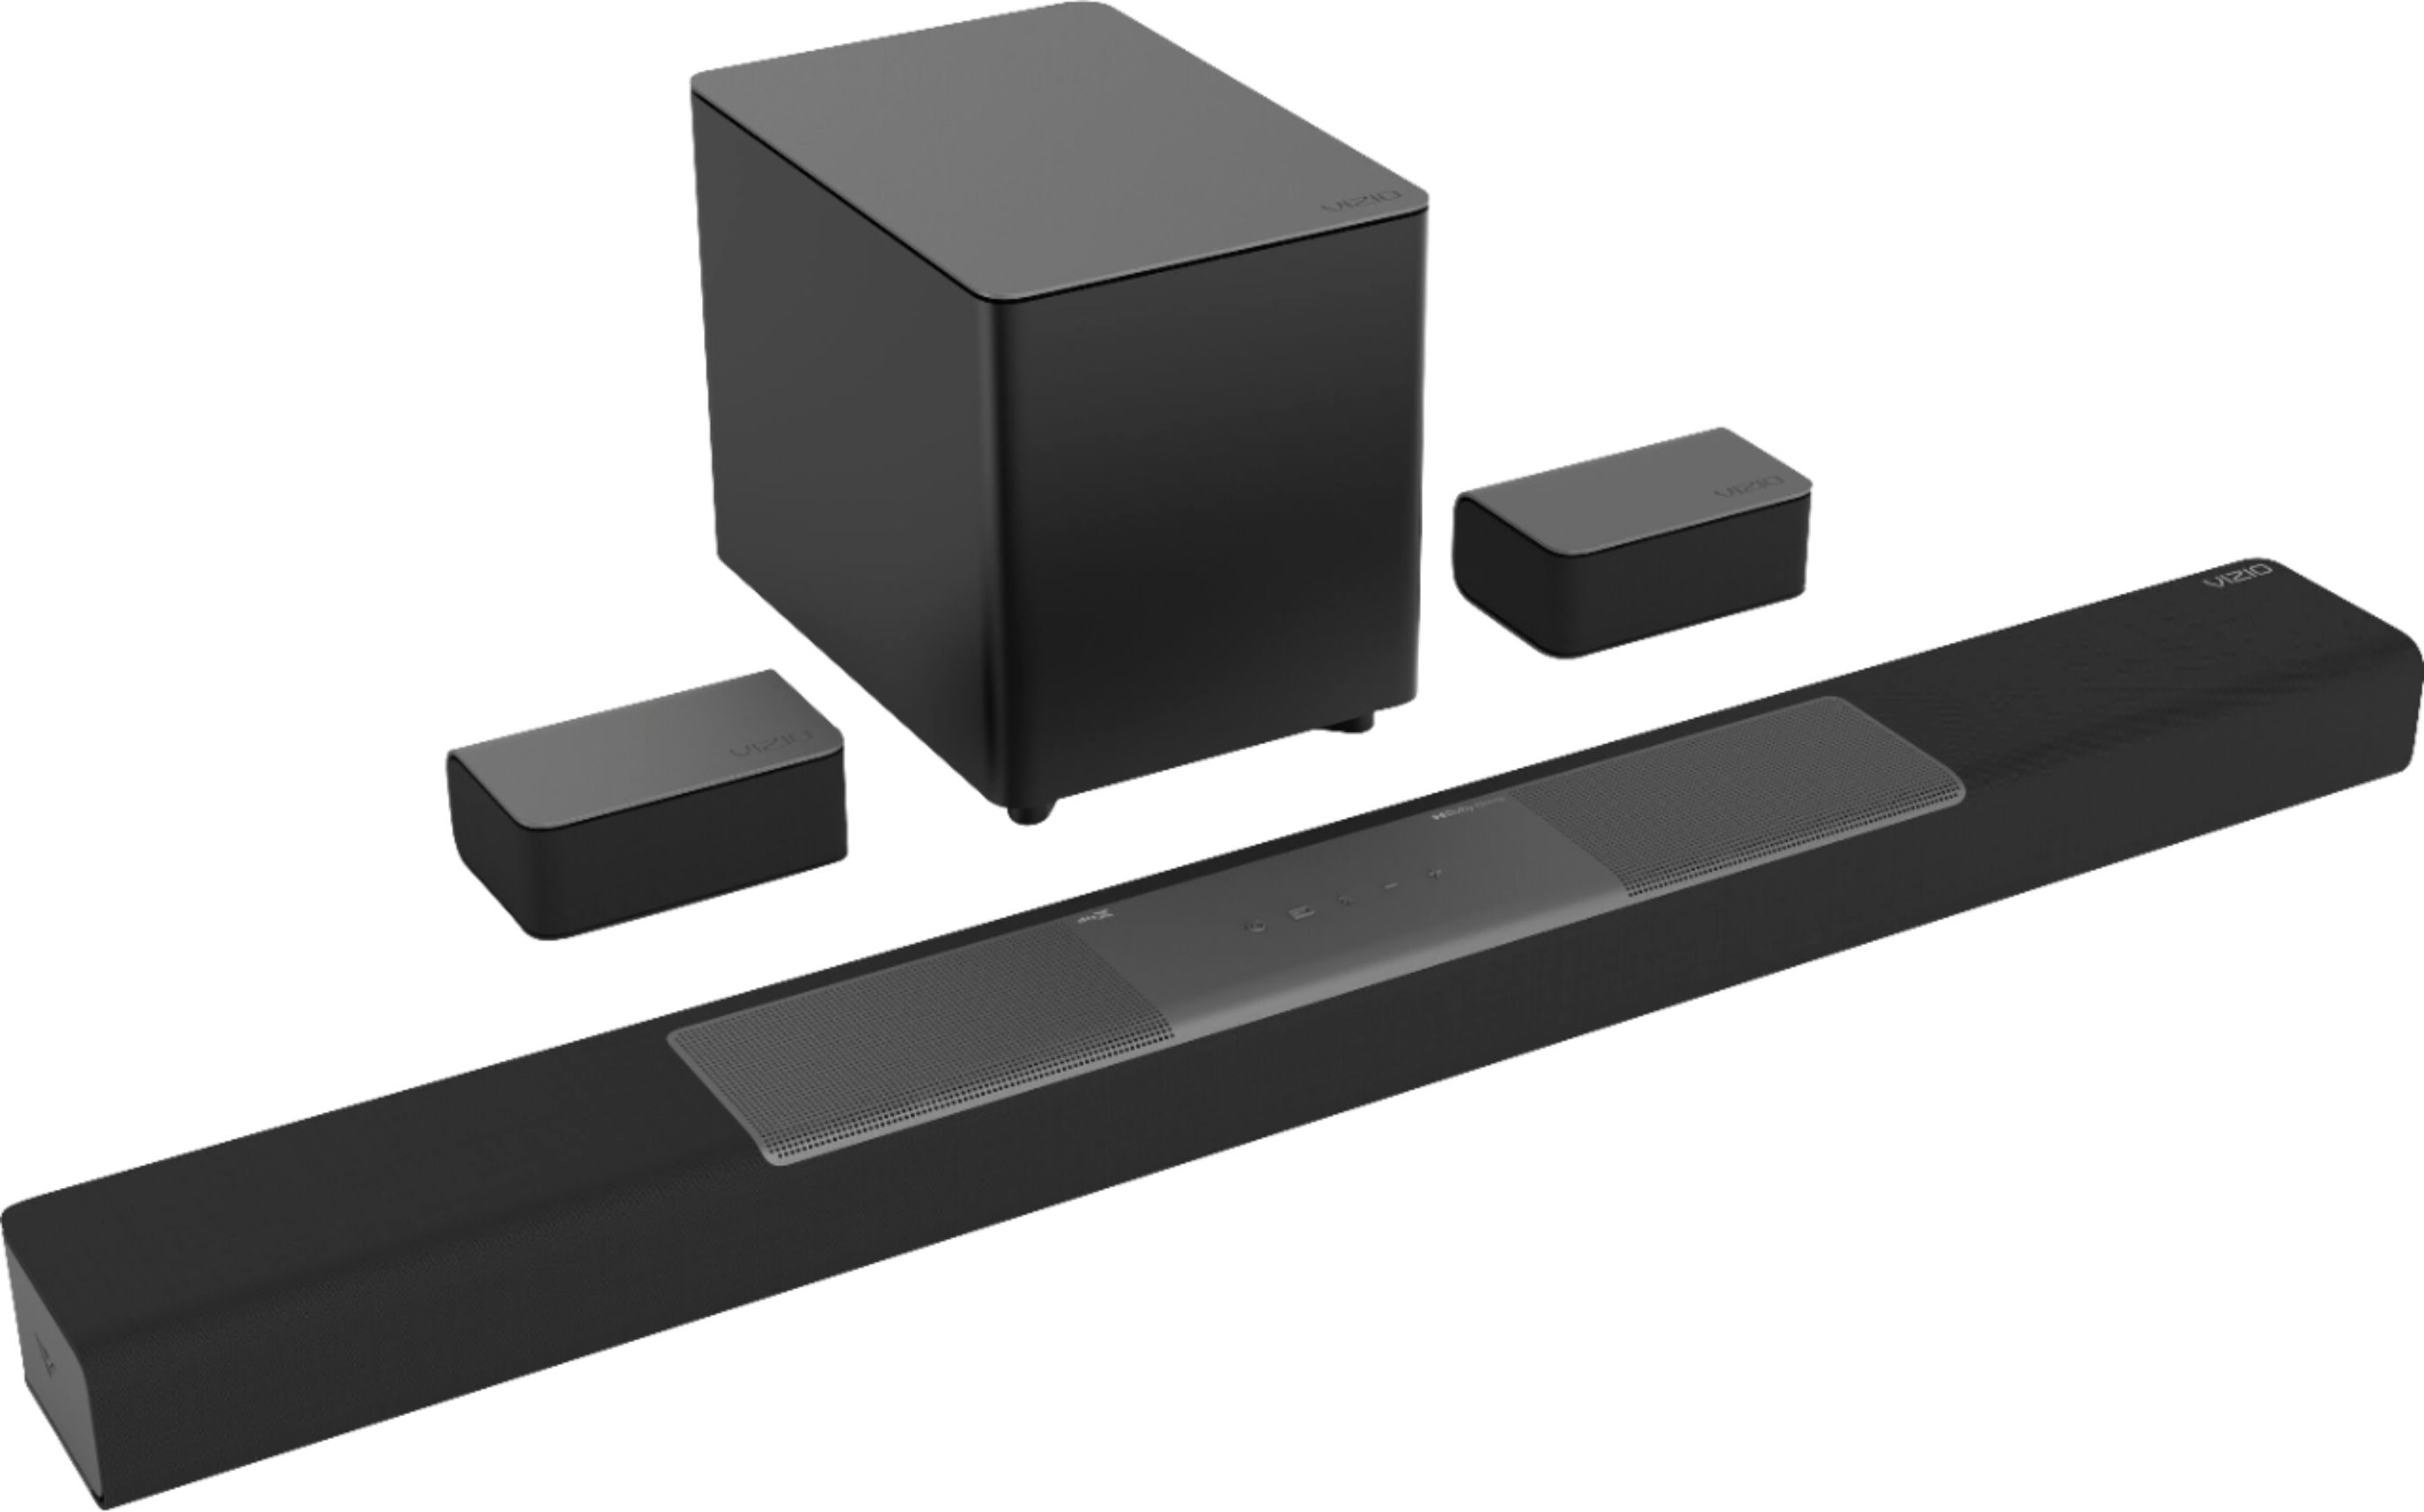 VIZIO 5.1.2-Channel M-Series Premium Sound Bar with Wireless Subwoofer, Dolby Atmos and DTS:X M512a-H6 - Best Buy